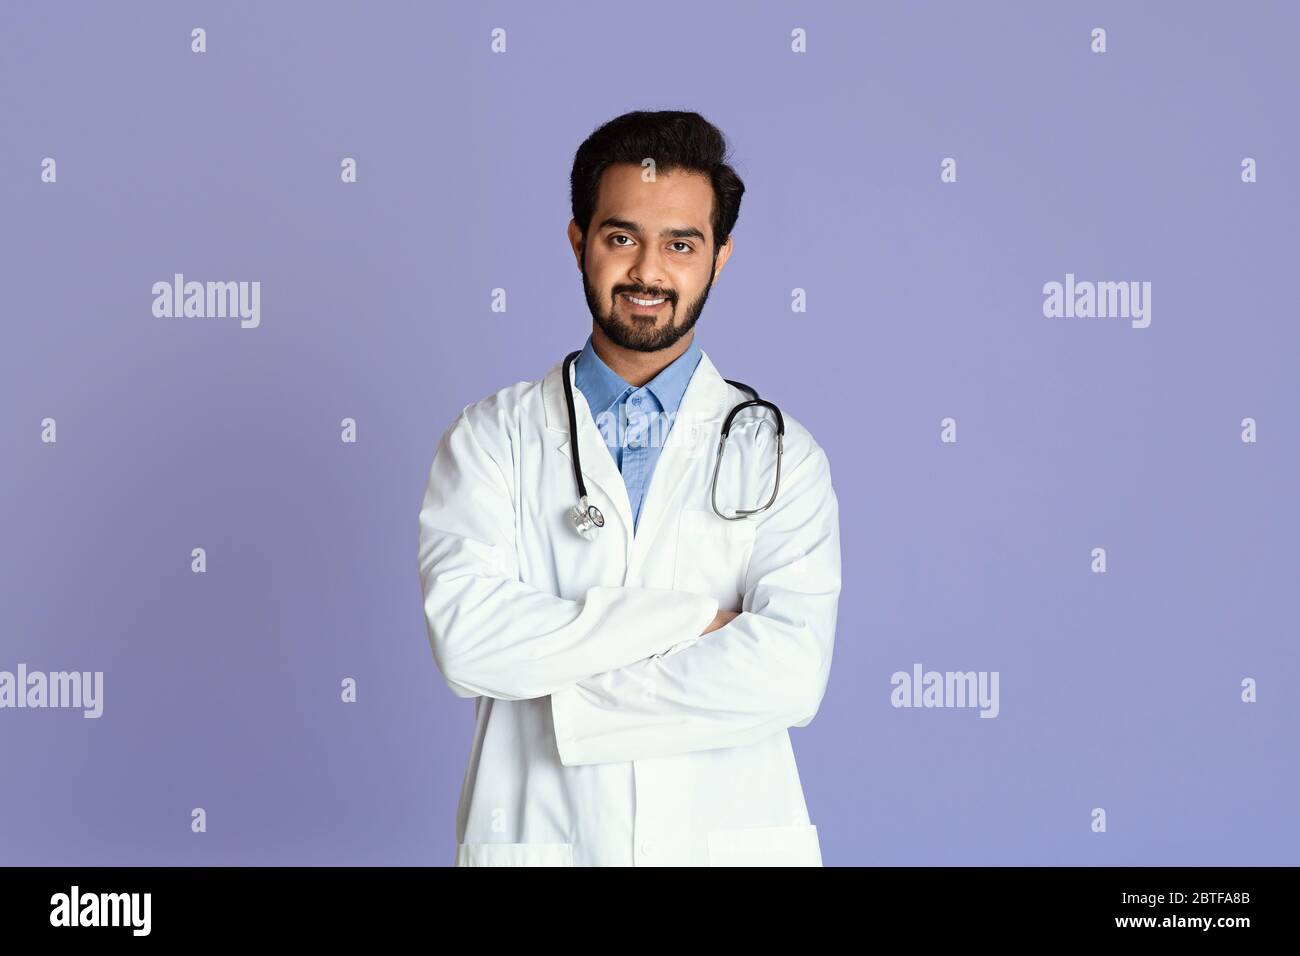 Confident Indian doctor in uniform crossing his arms on color background Stock Photo